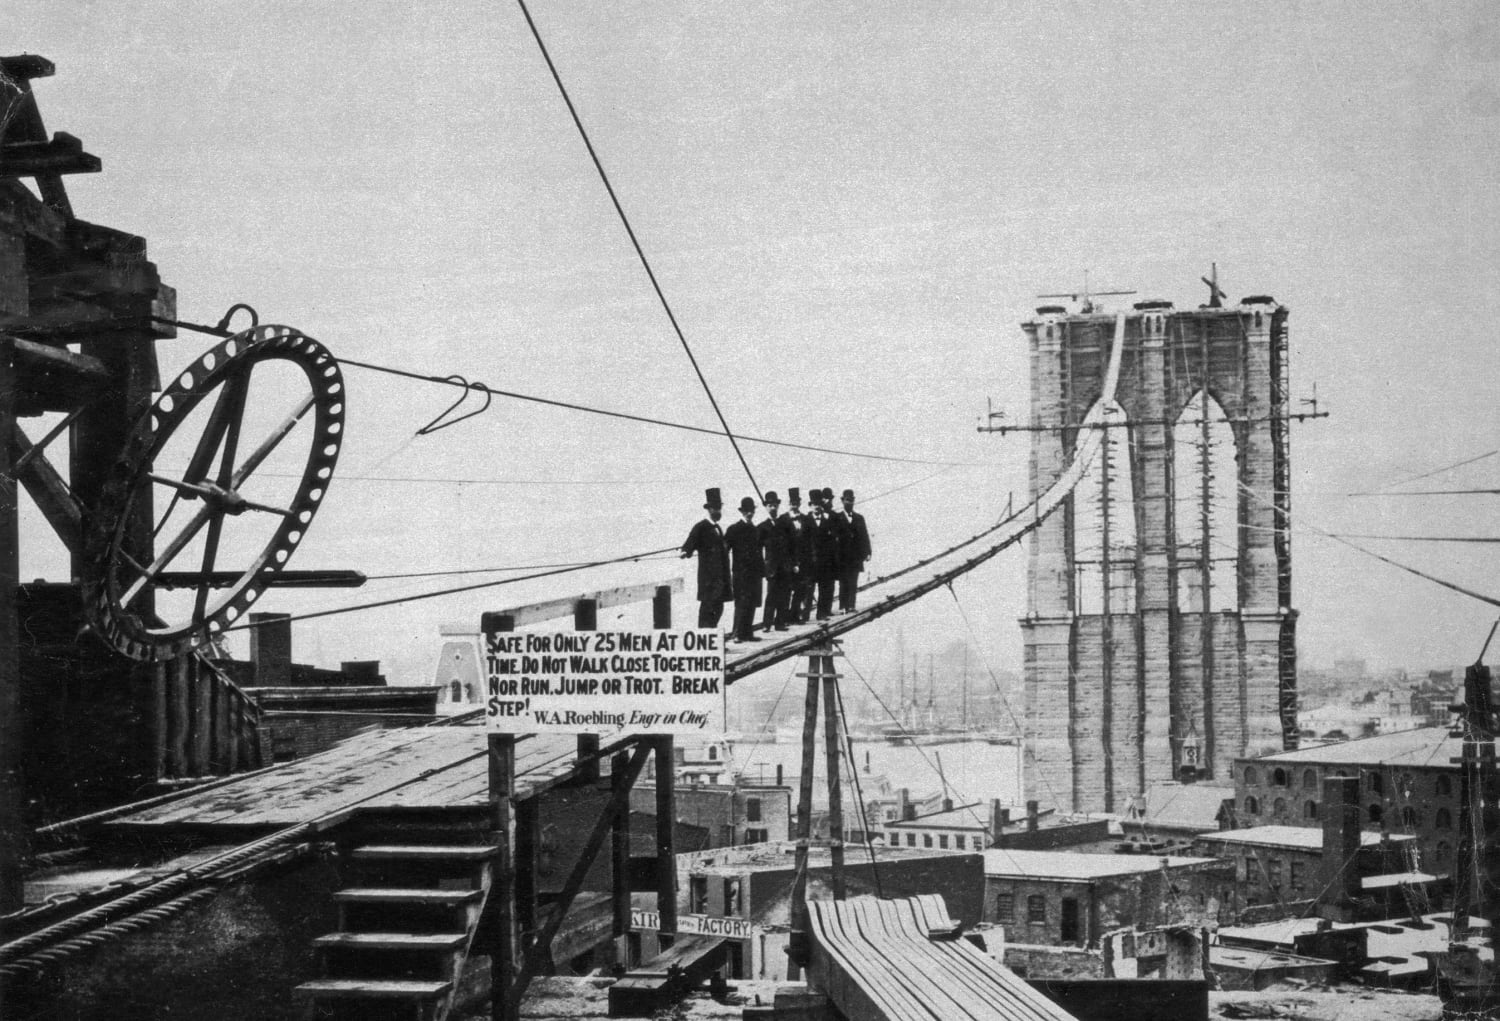 1875: Men pose for a photo on a temporary catwalk during the construction of the Brooklyn Bridge.